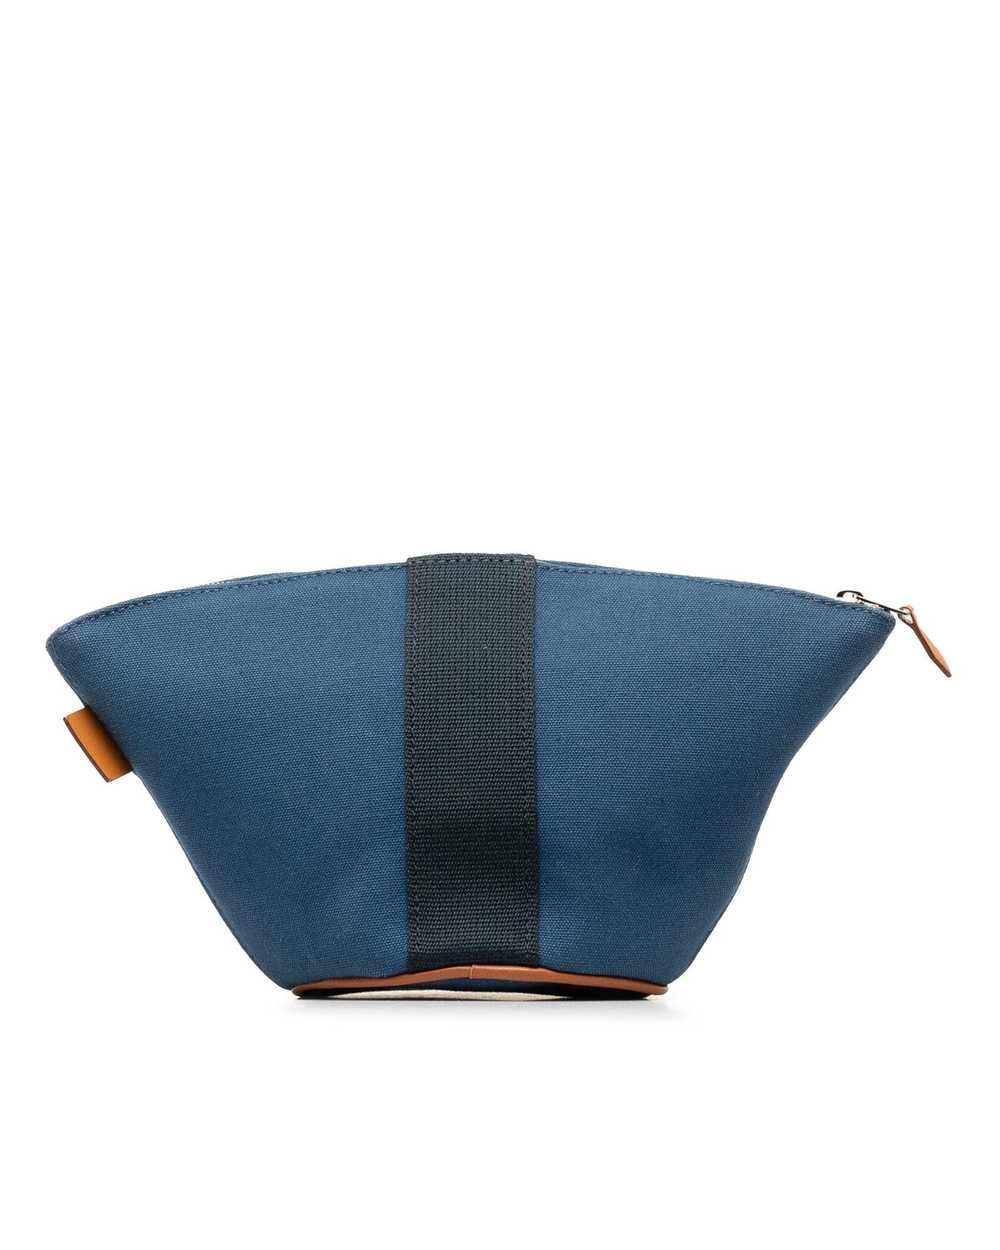 Hermes Canvas and Leather Top Zip Pouch - image 3